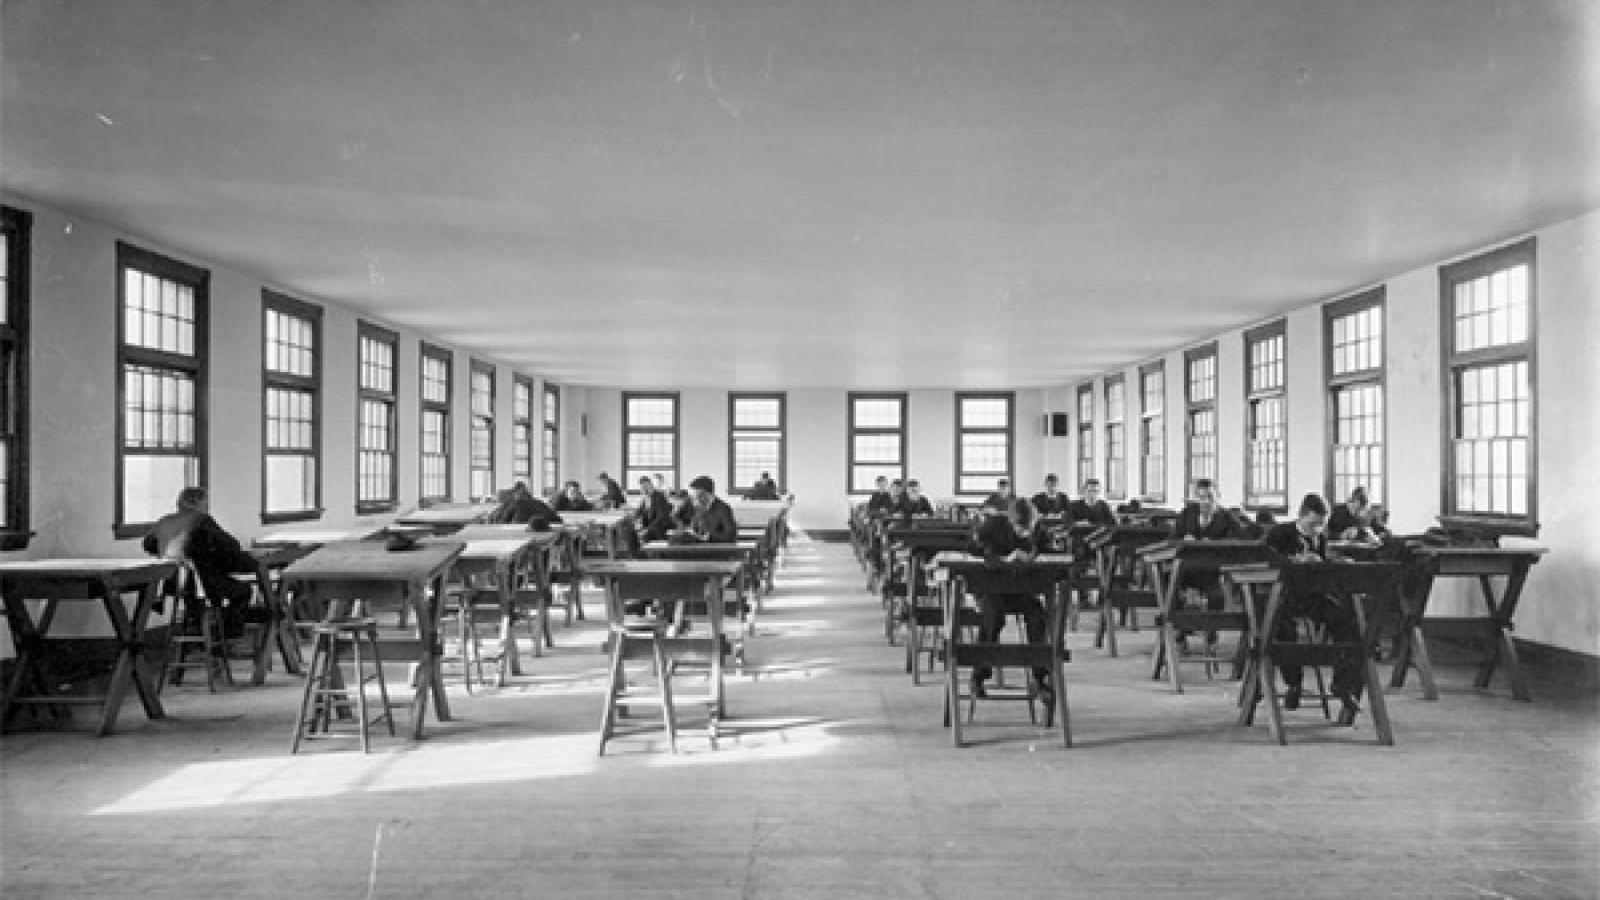 Hayes Hall classroom with students sitting at desks